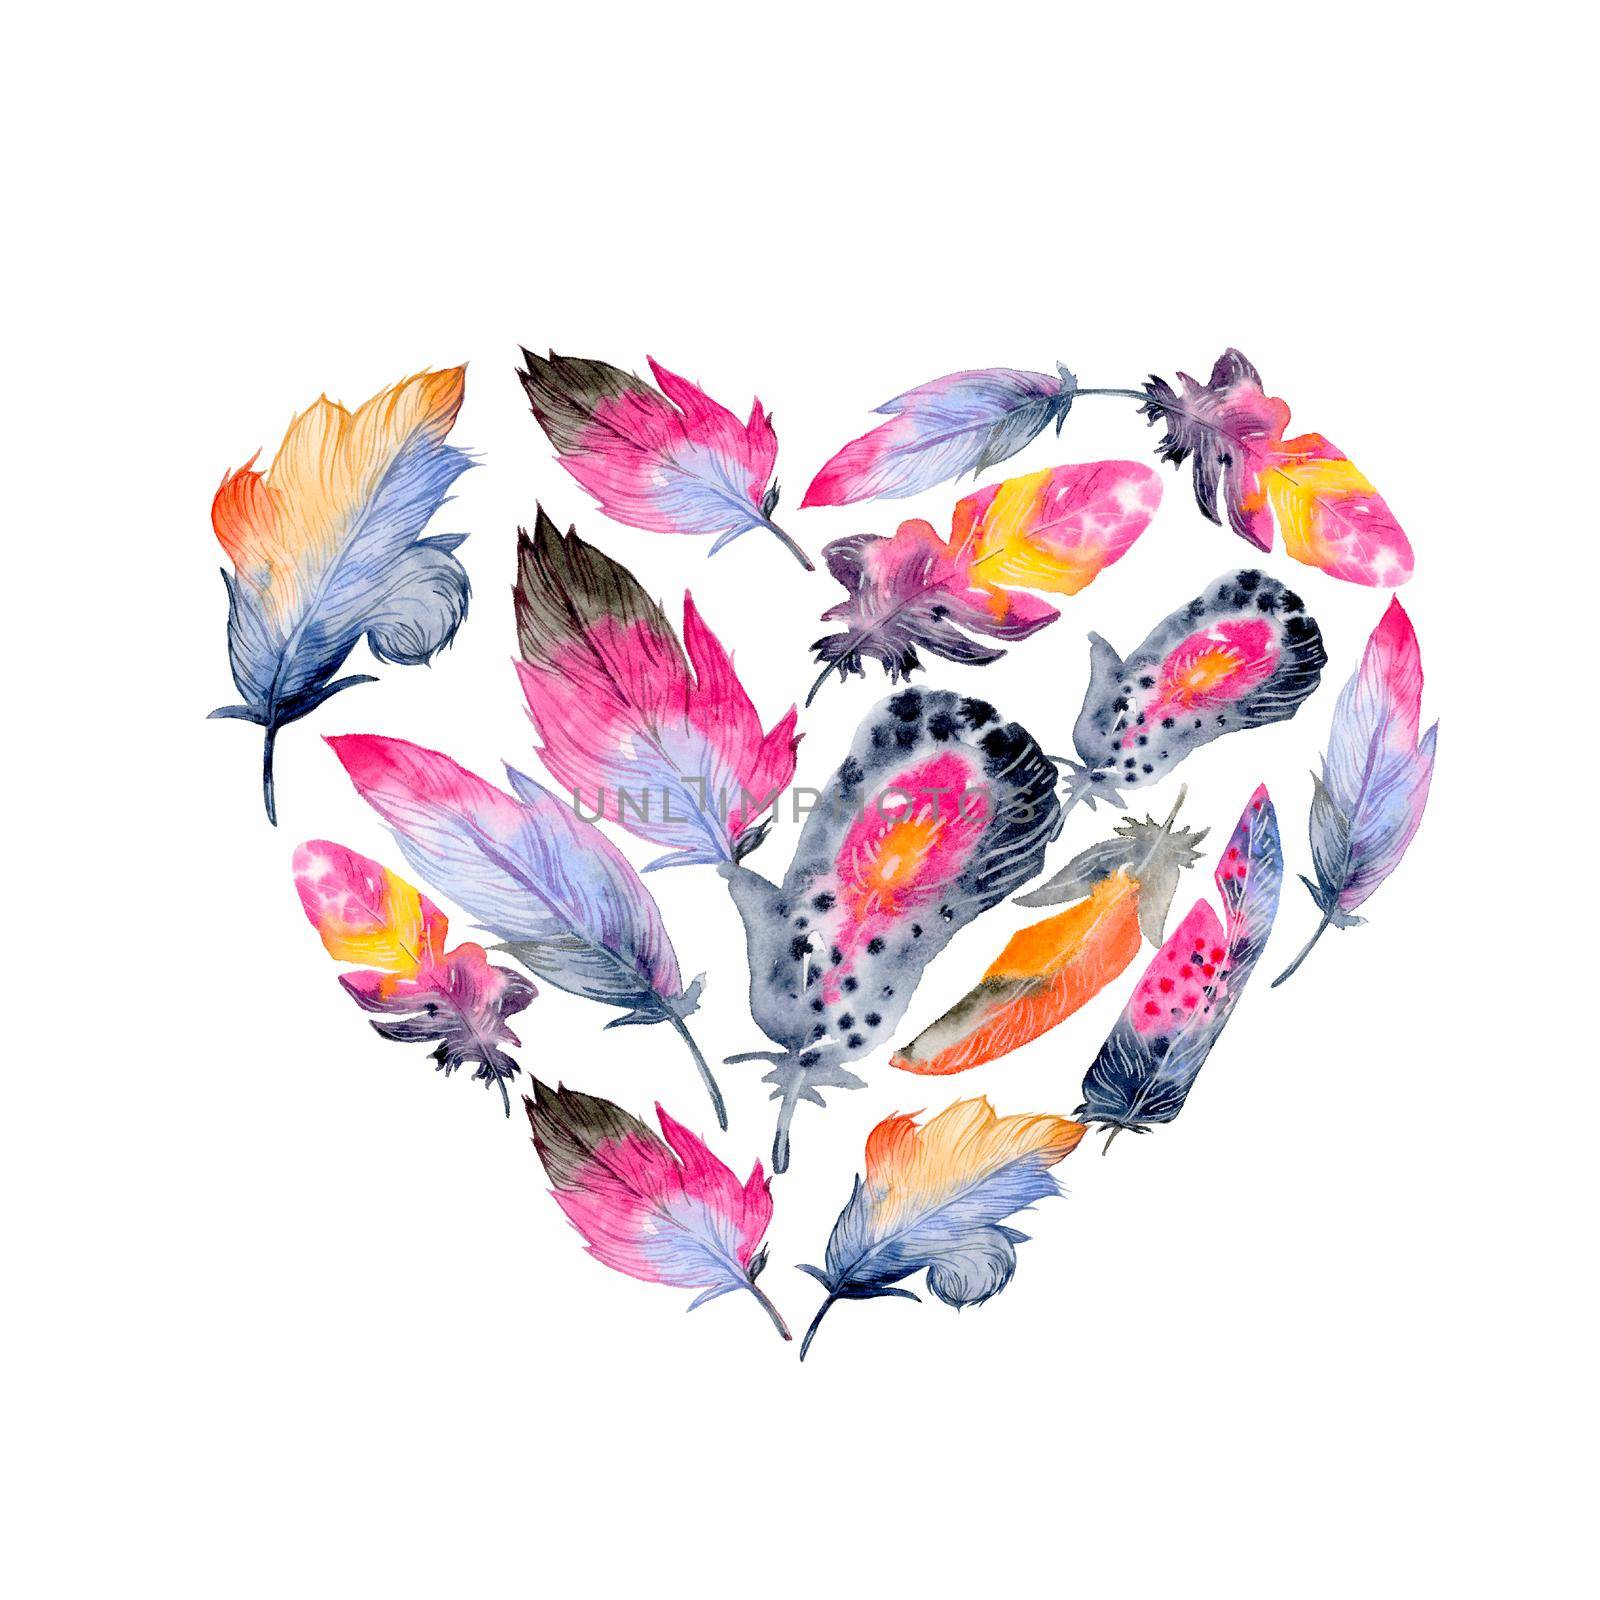 Feathers. Vintage heart composition in boho style. Watercolor hand drawn illustration by fireFLYart